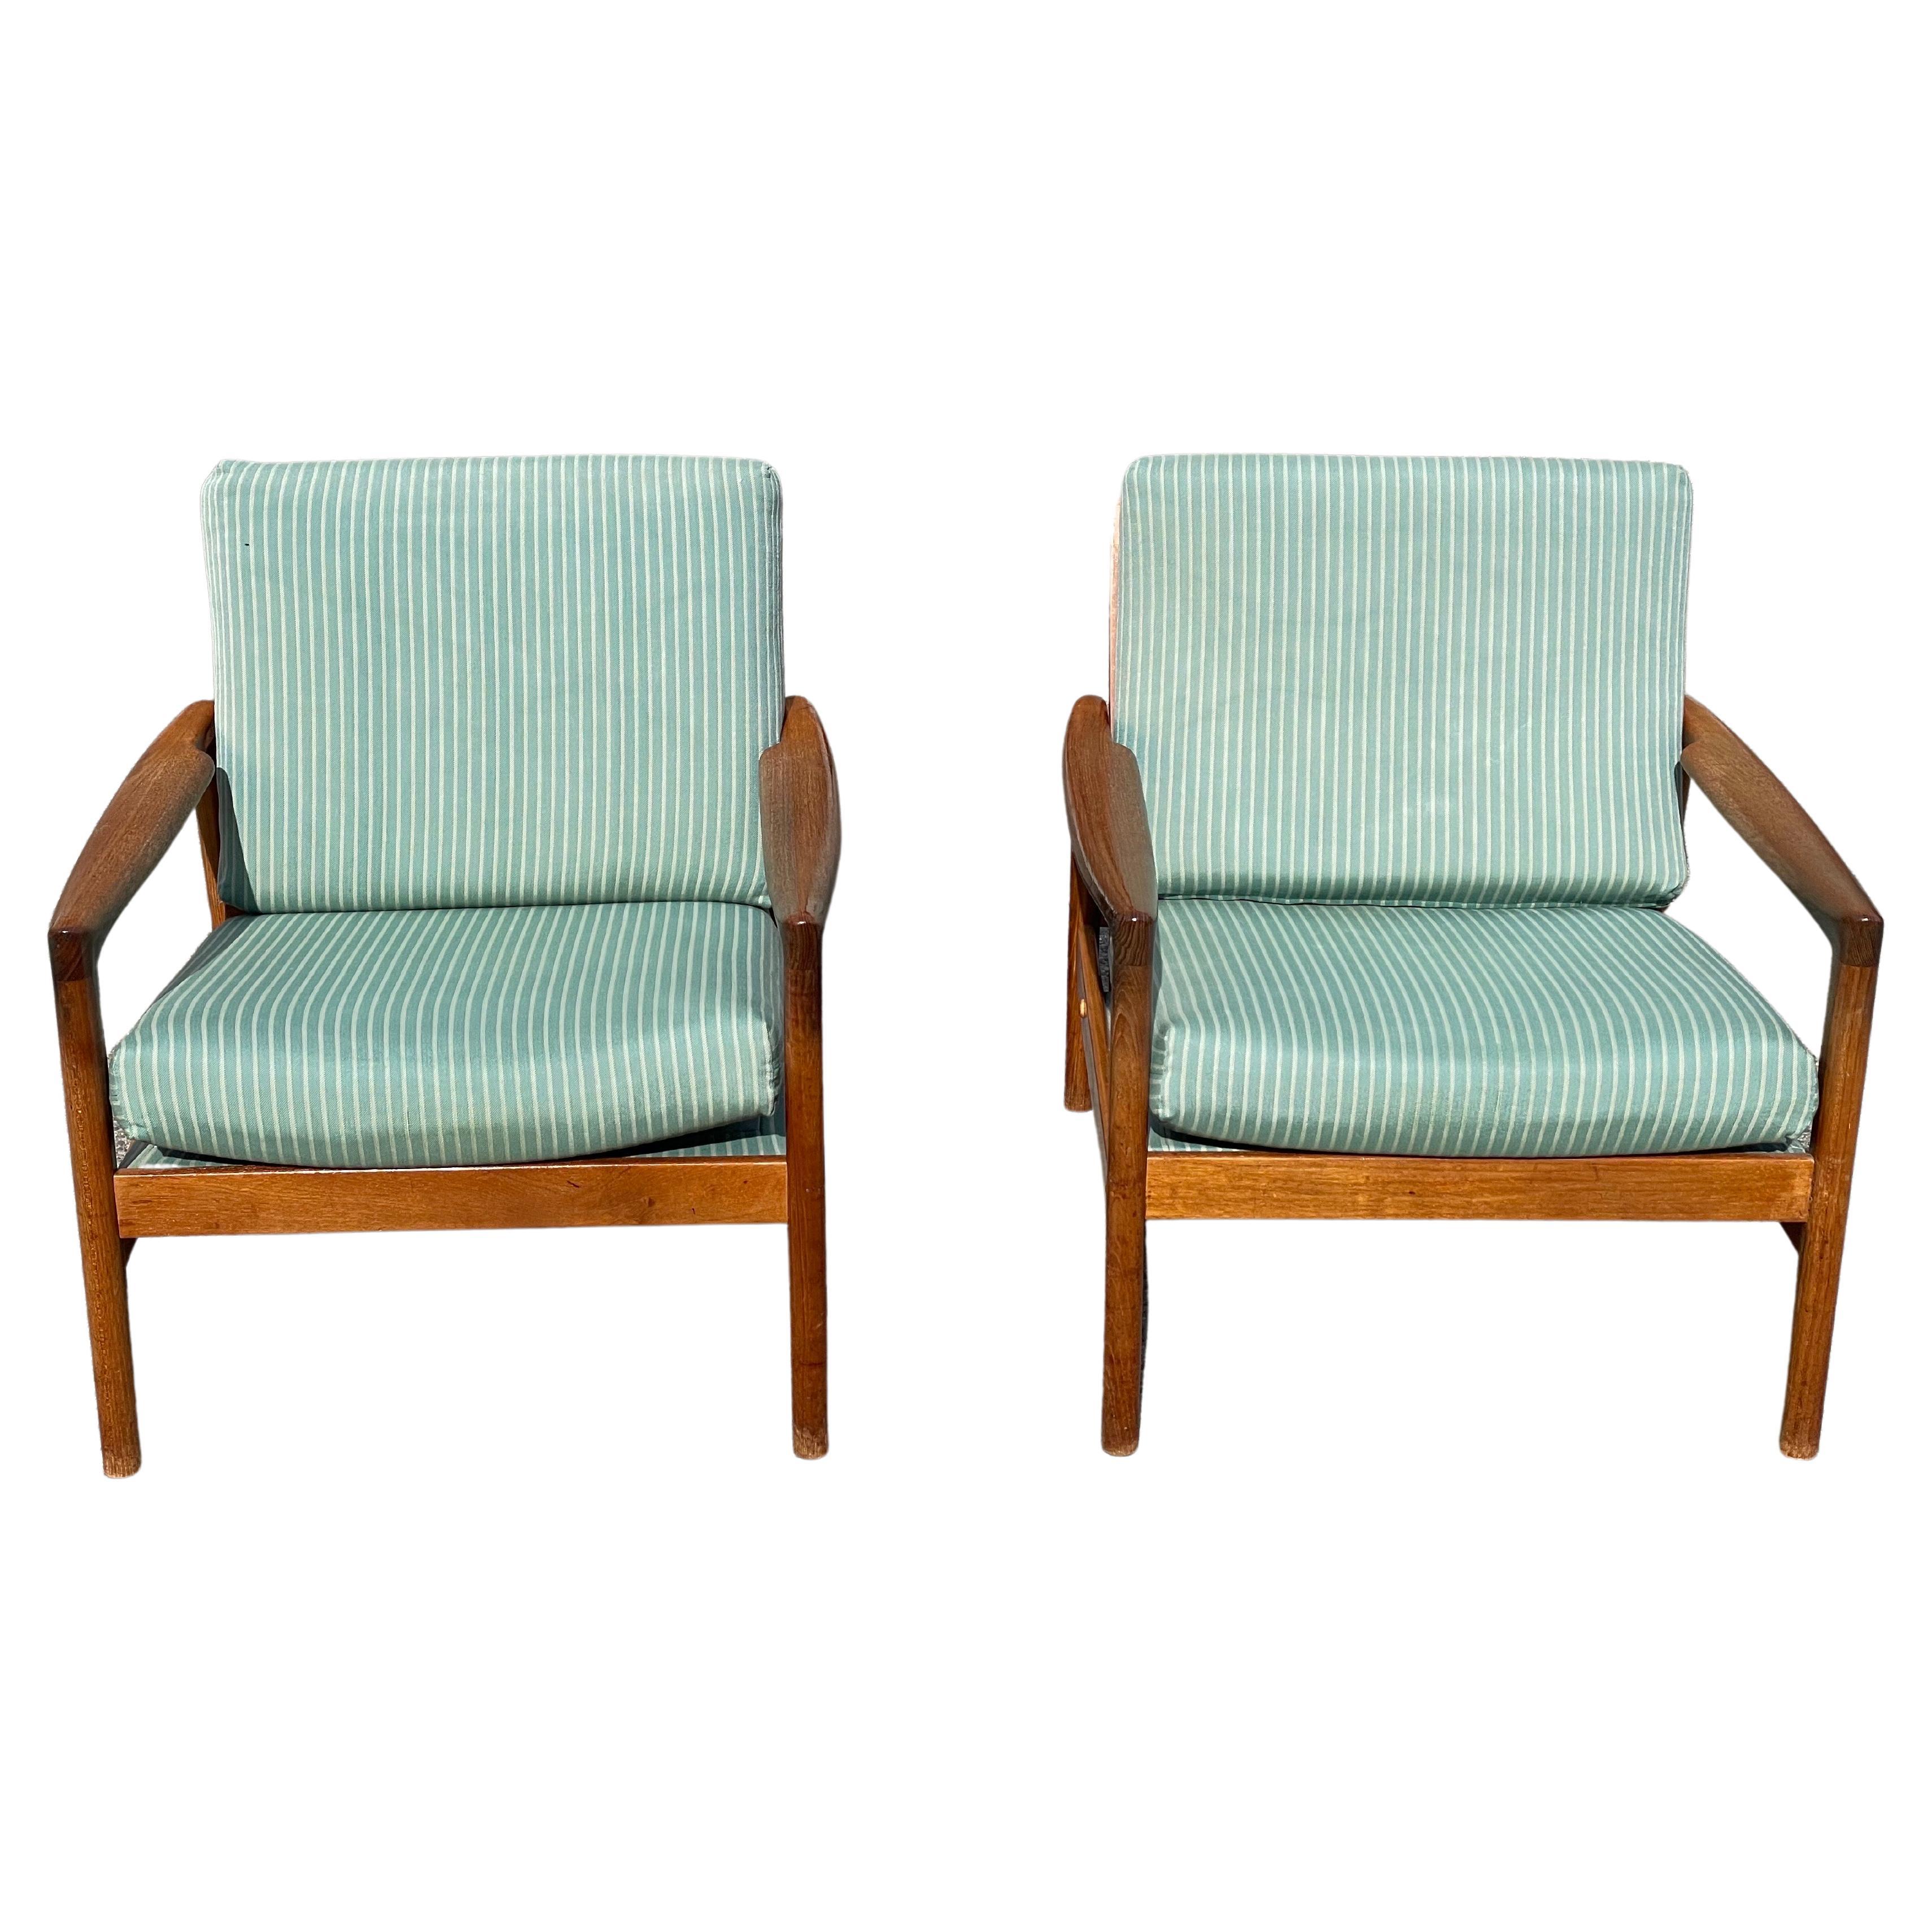 Set of Rare Seen Hans Olsen Teak Chairs by Juul Kristensen from the 1960s For Sale